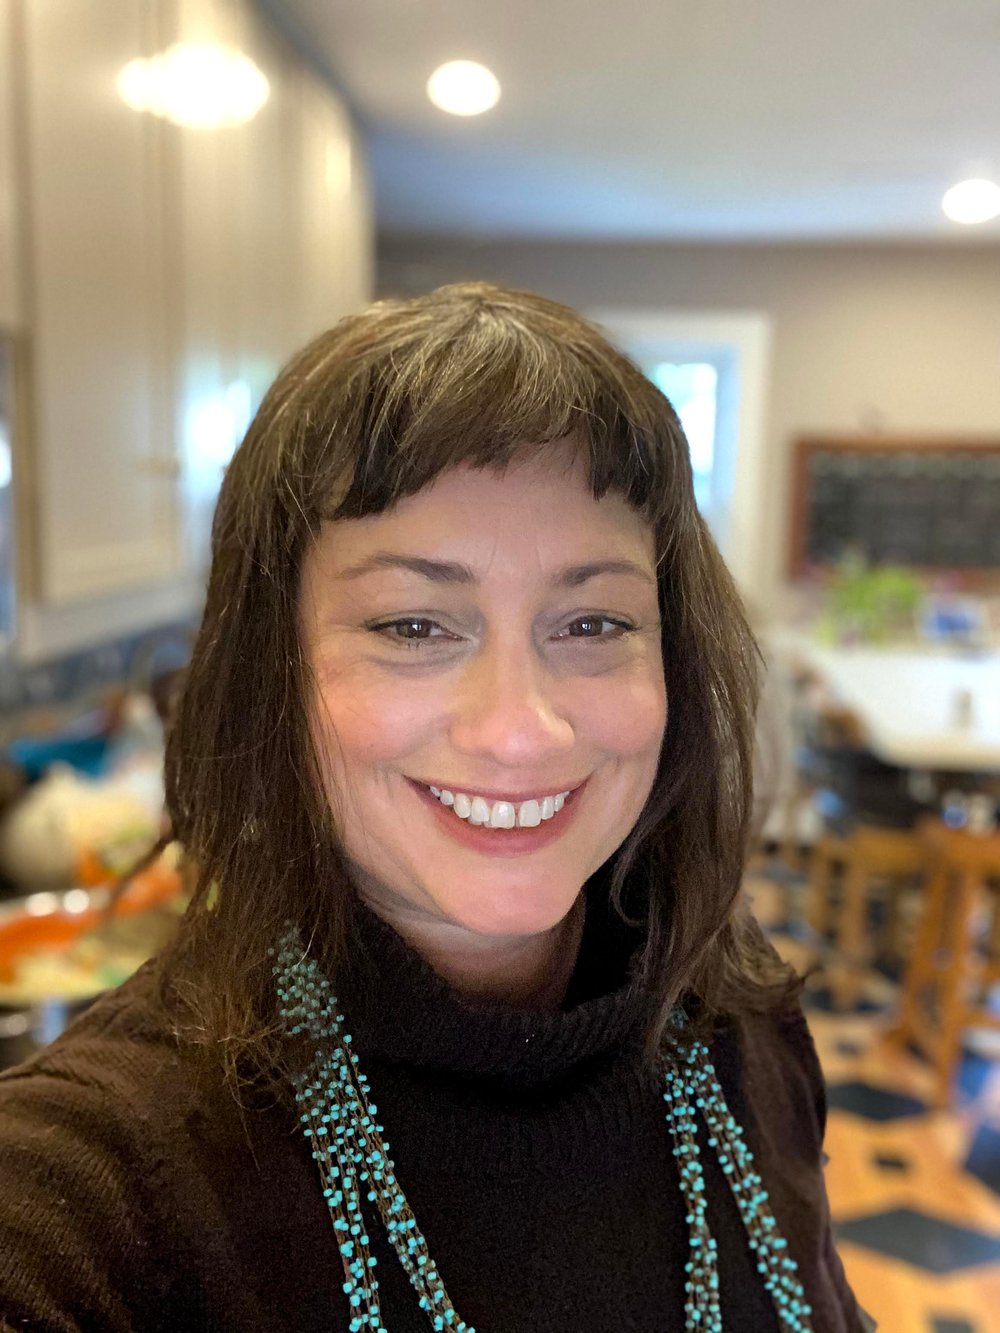 A close-up photo of Rev. Melissa Tustin. She is a white woman with shoulder length brown hair wearing a brown sweater and a necklace made of tiny turquoise beads.